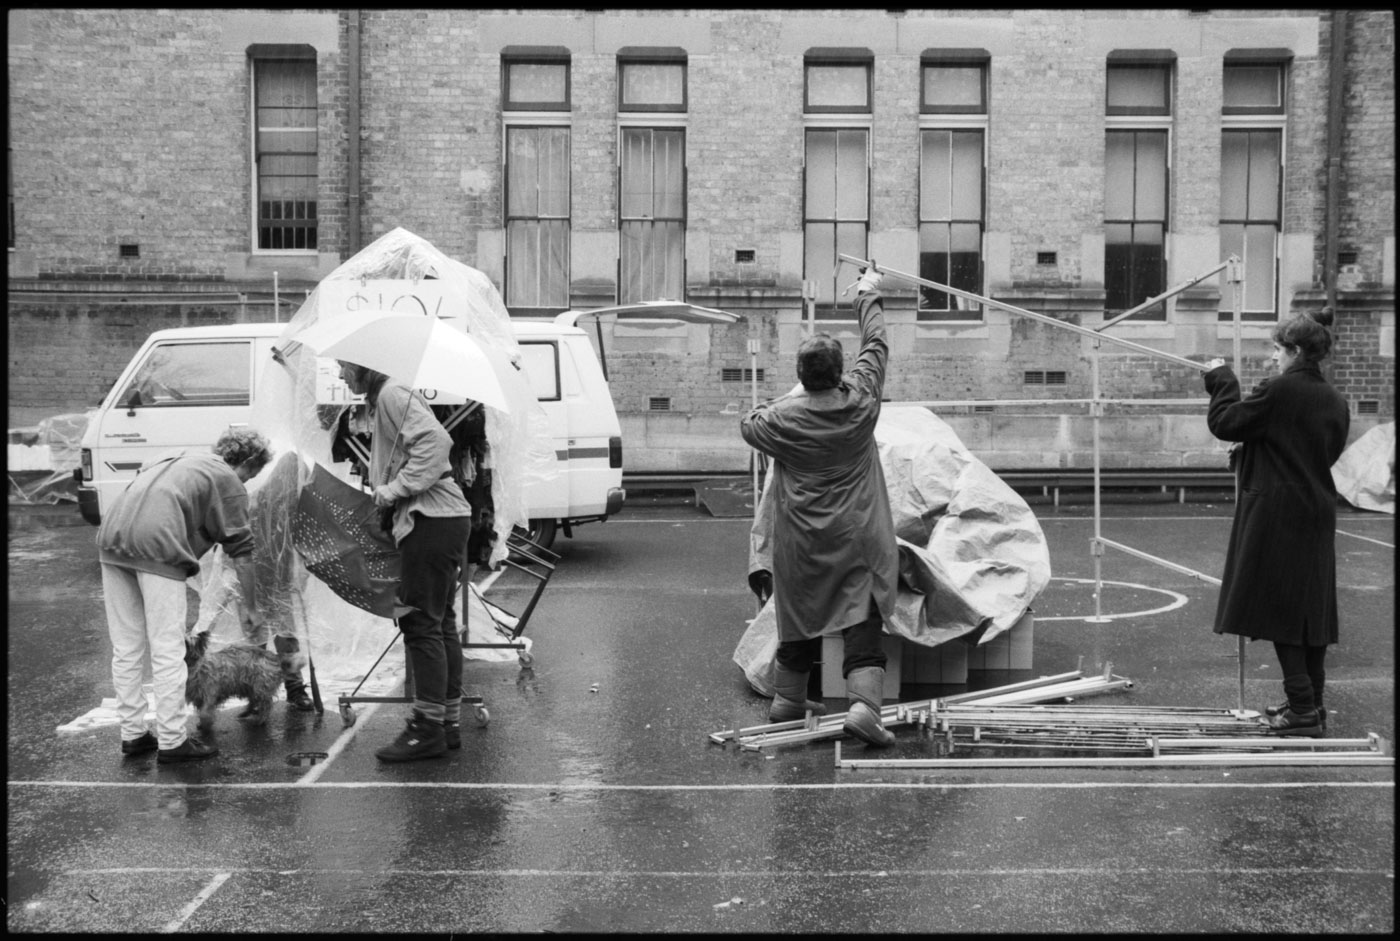 Setting up in the rain | 1992 | R14-34